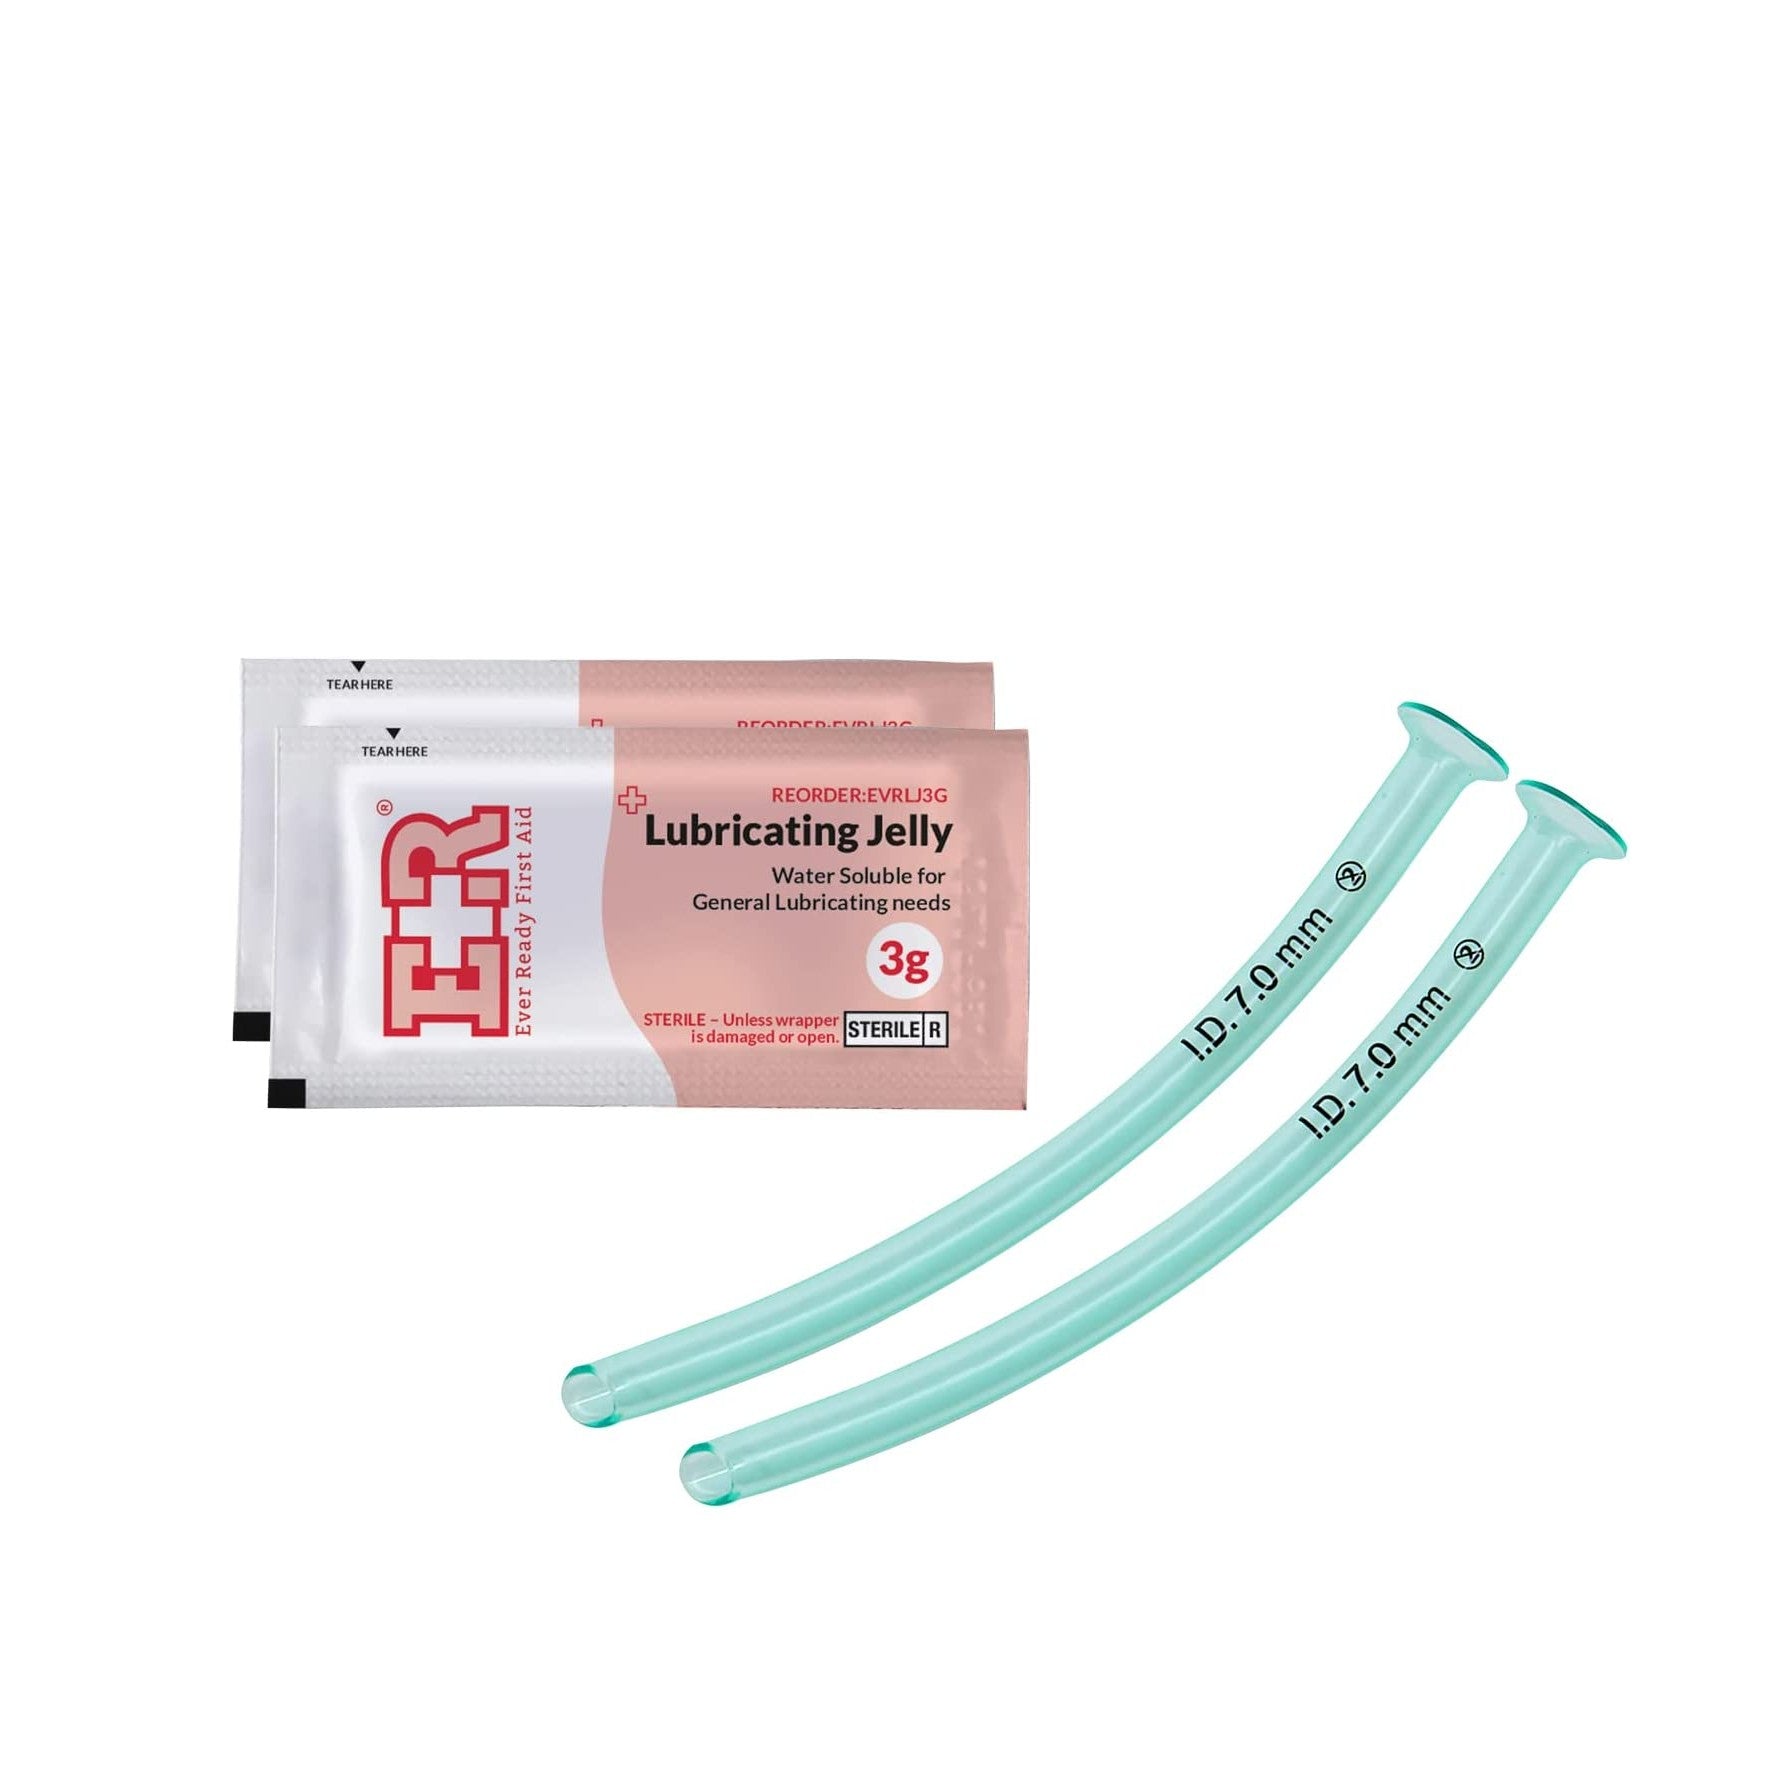 Ever Ready First Aid Nasopharyngeal Airway (NPA) with Packet of Lubricant Jelly 3g